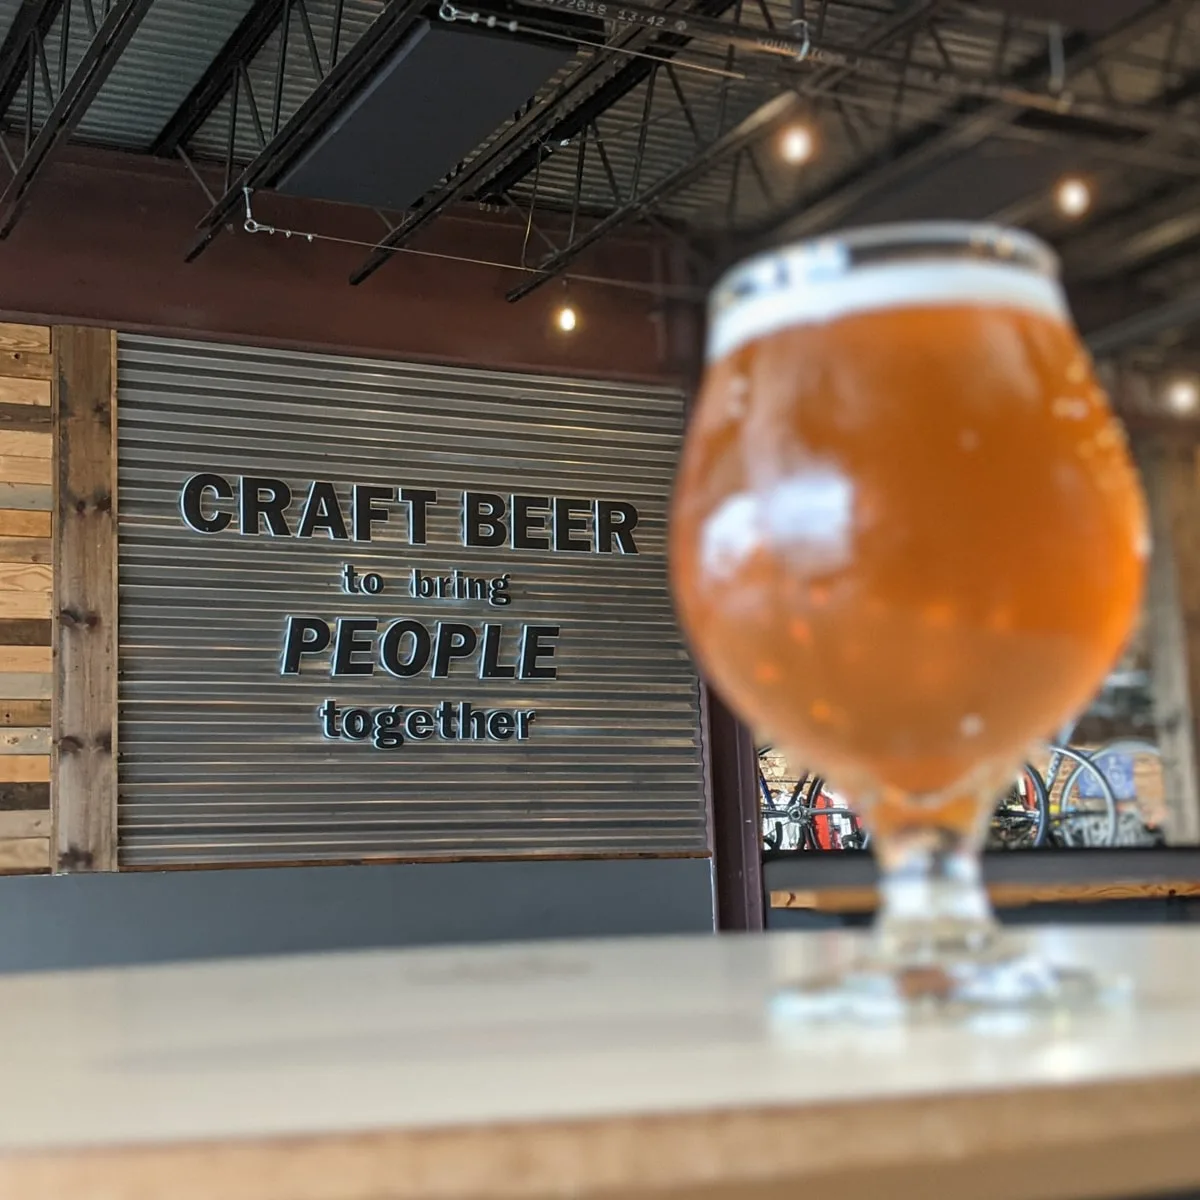 Sign showing "Craft Beer to bring People Together" at Bays Mountain Brewery 